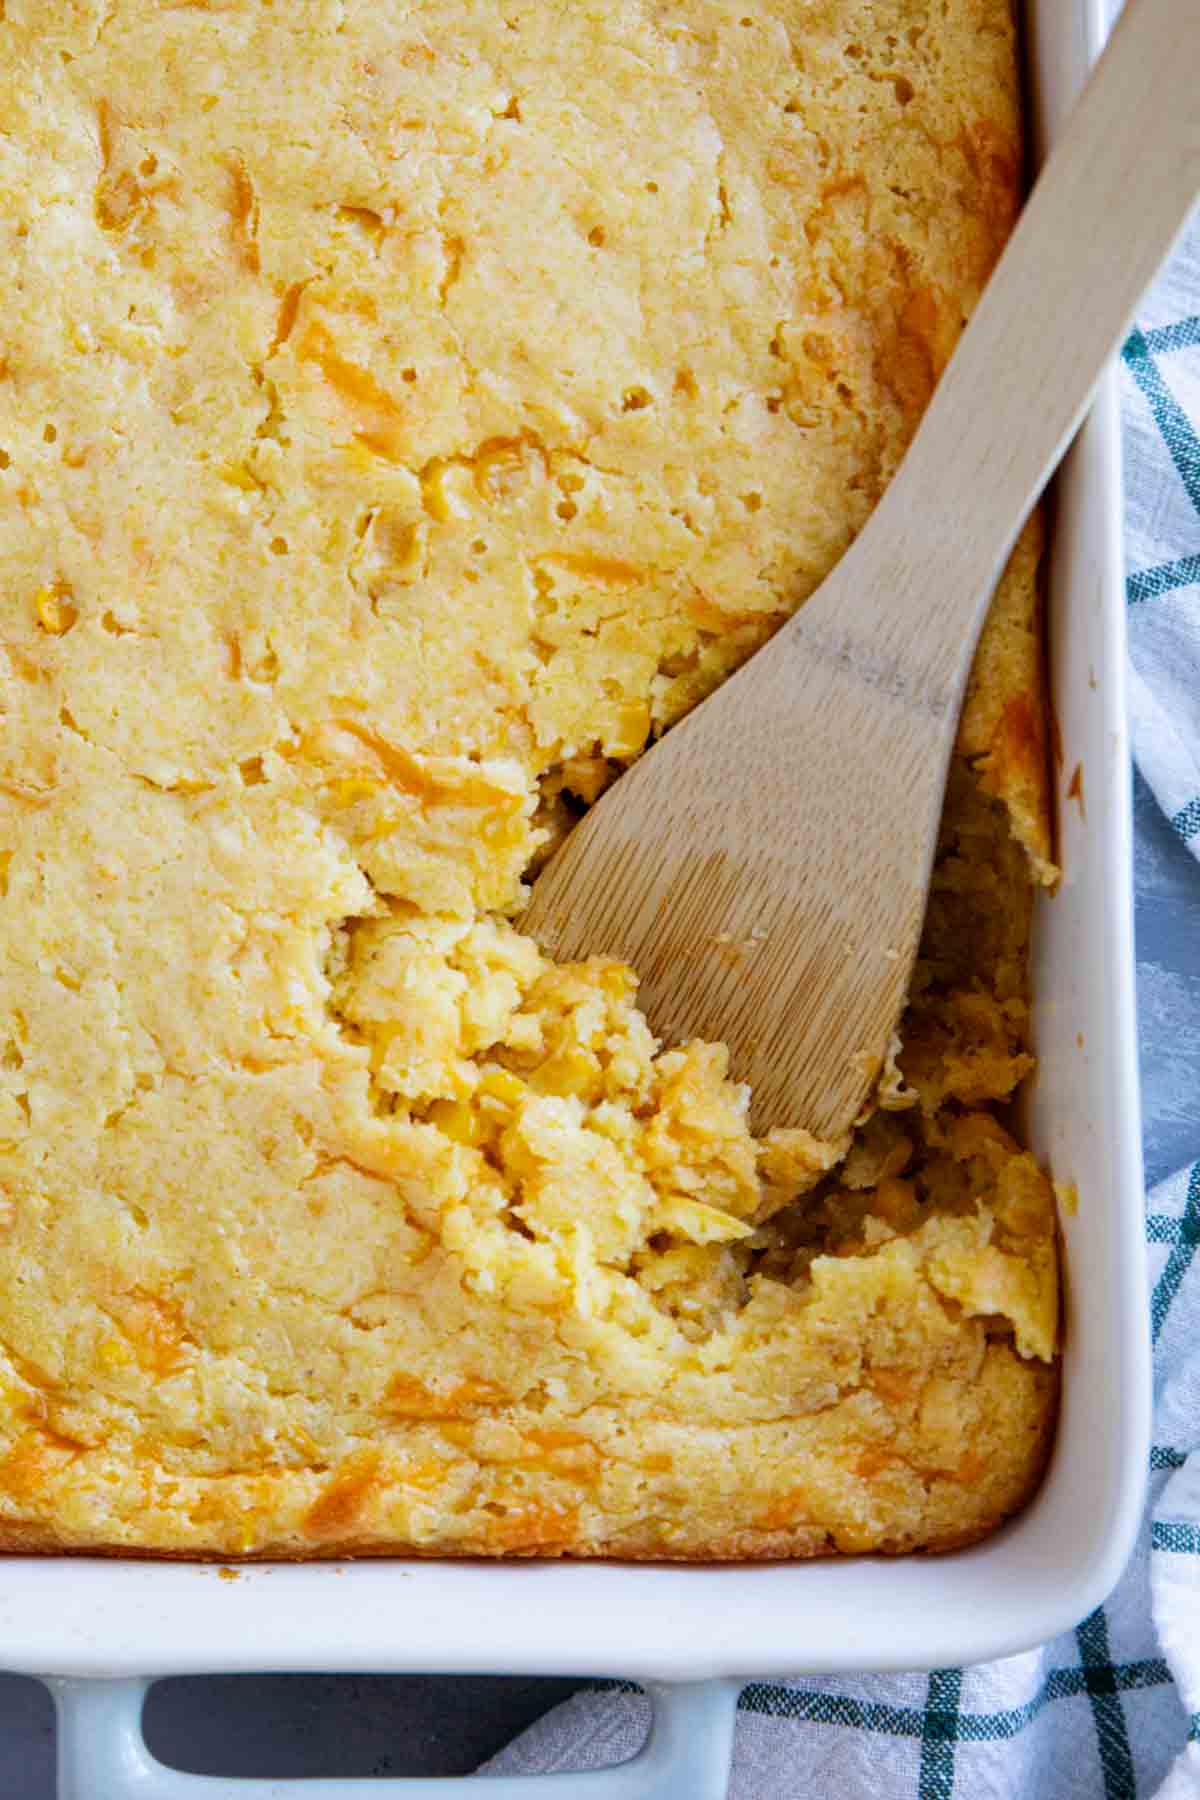 Dish of corn casserole with a wooden spoon.